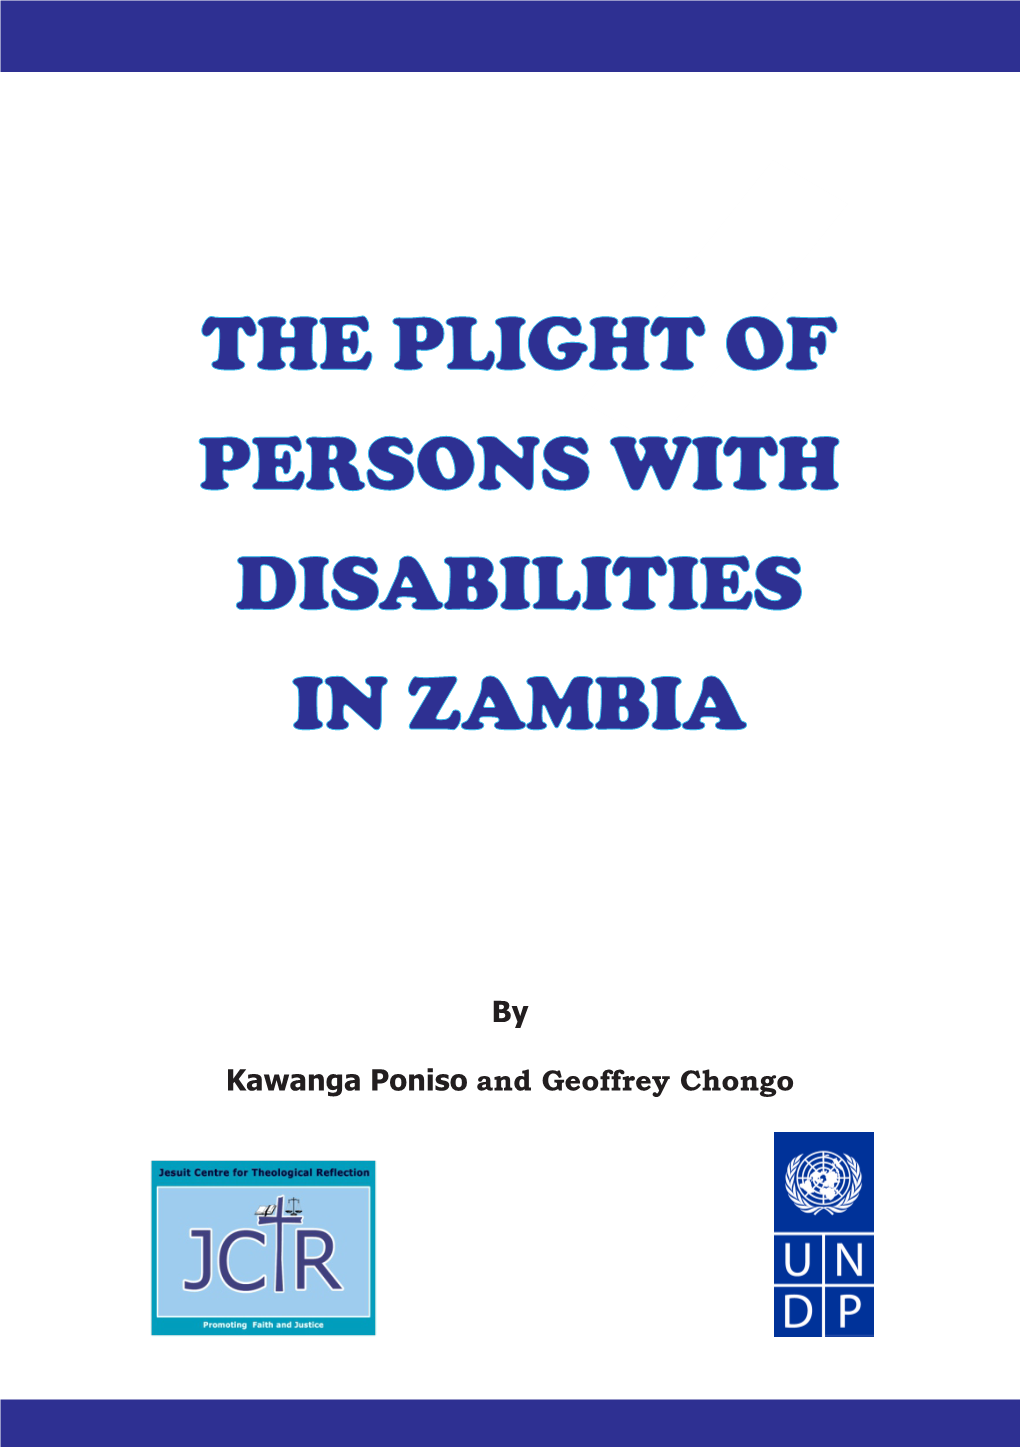 The Plight of Persons with Disabilities in Zambia